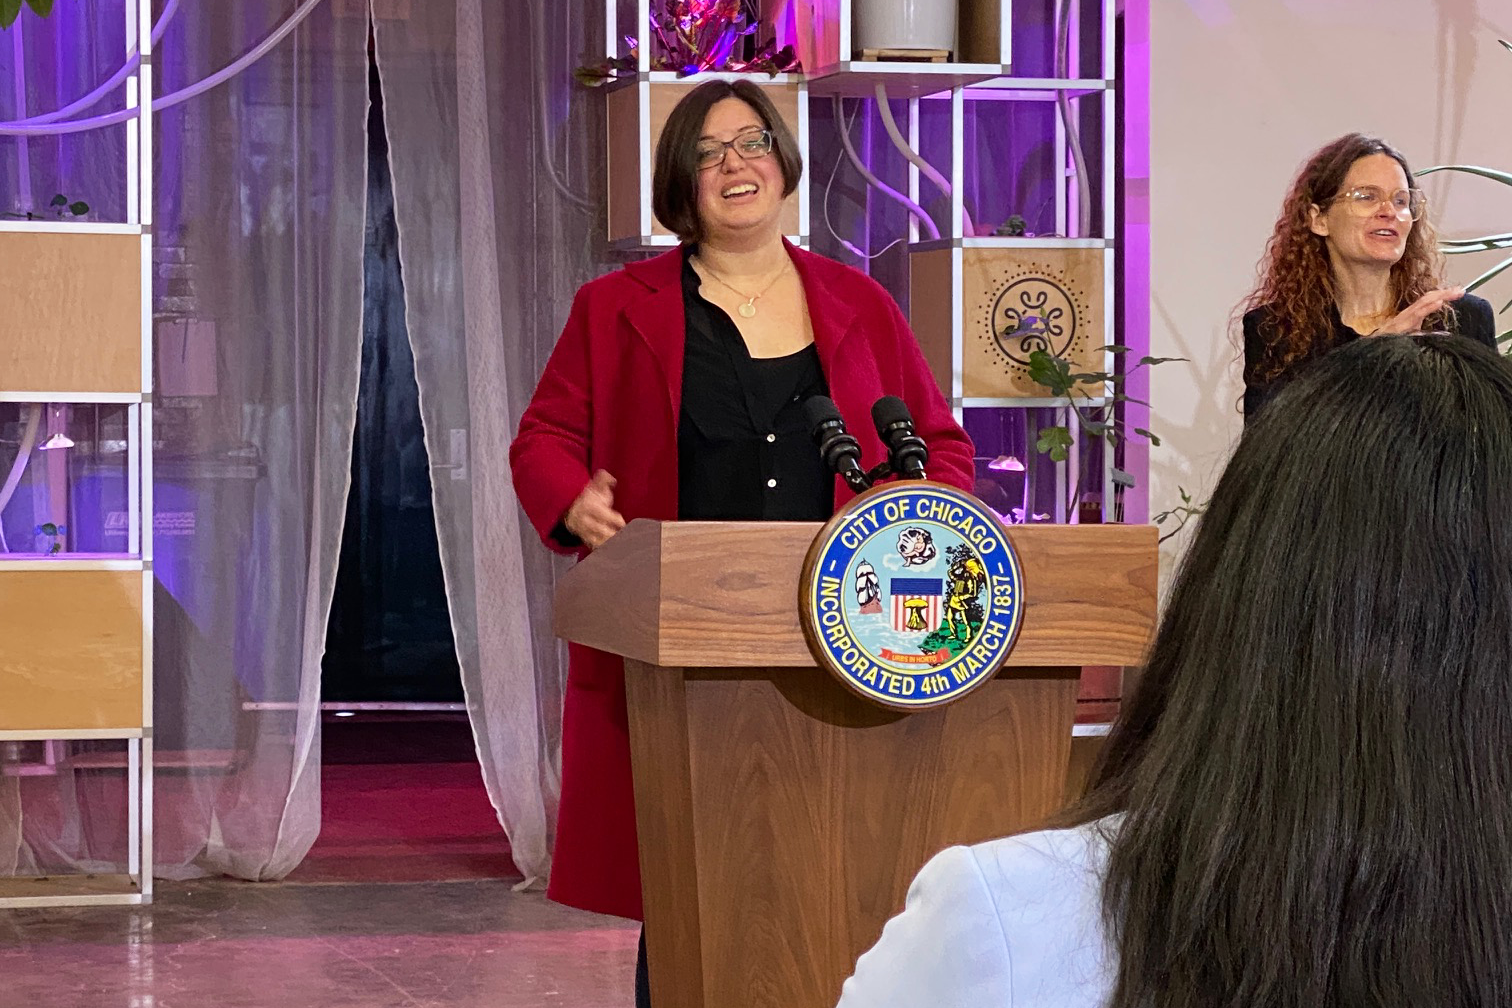 Ann Hinterman was invited to speak at the City of Chicago's Climate Action Plan press conference on Earth Day.